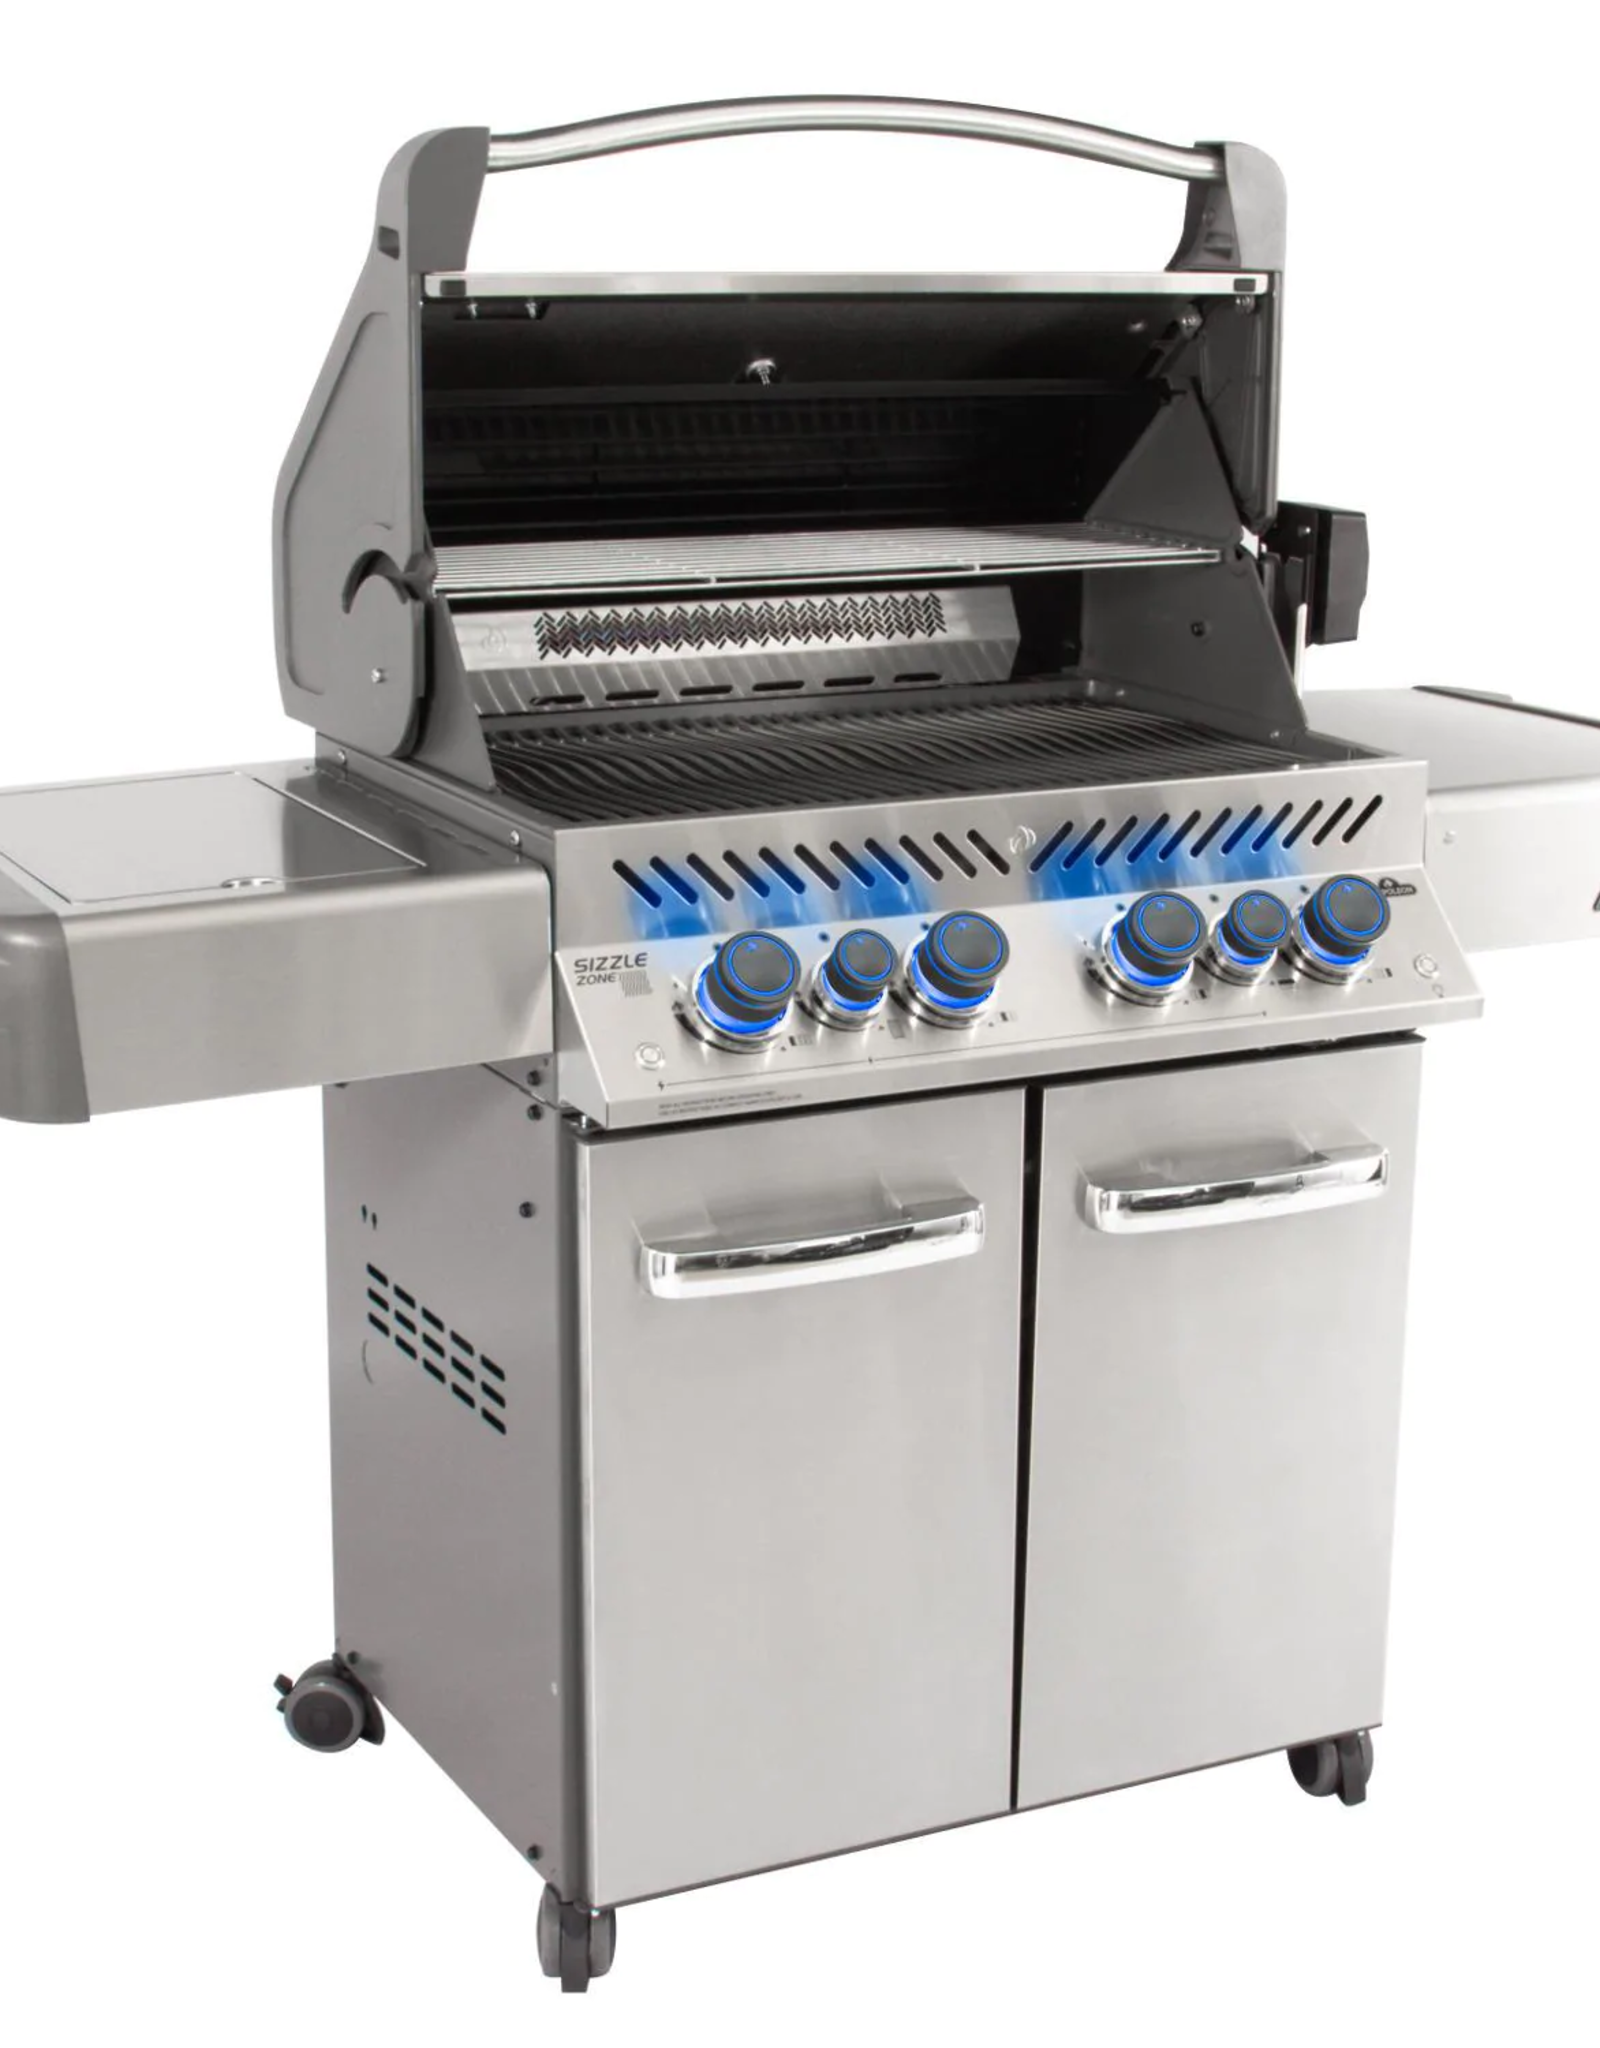 Napoleon Napoleon Prestige 500 Propane Gas Grill with Infrared Rear Burner and Infrared Side Burner and Rotisserie Kit - P500RSIBPSS-3